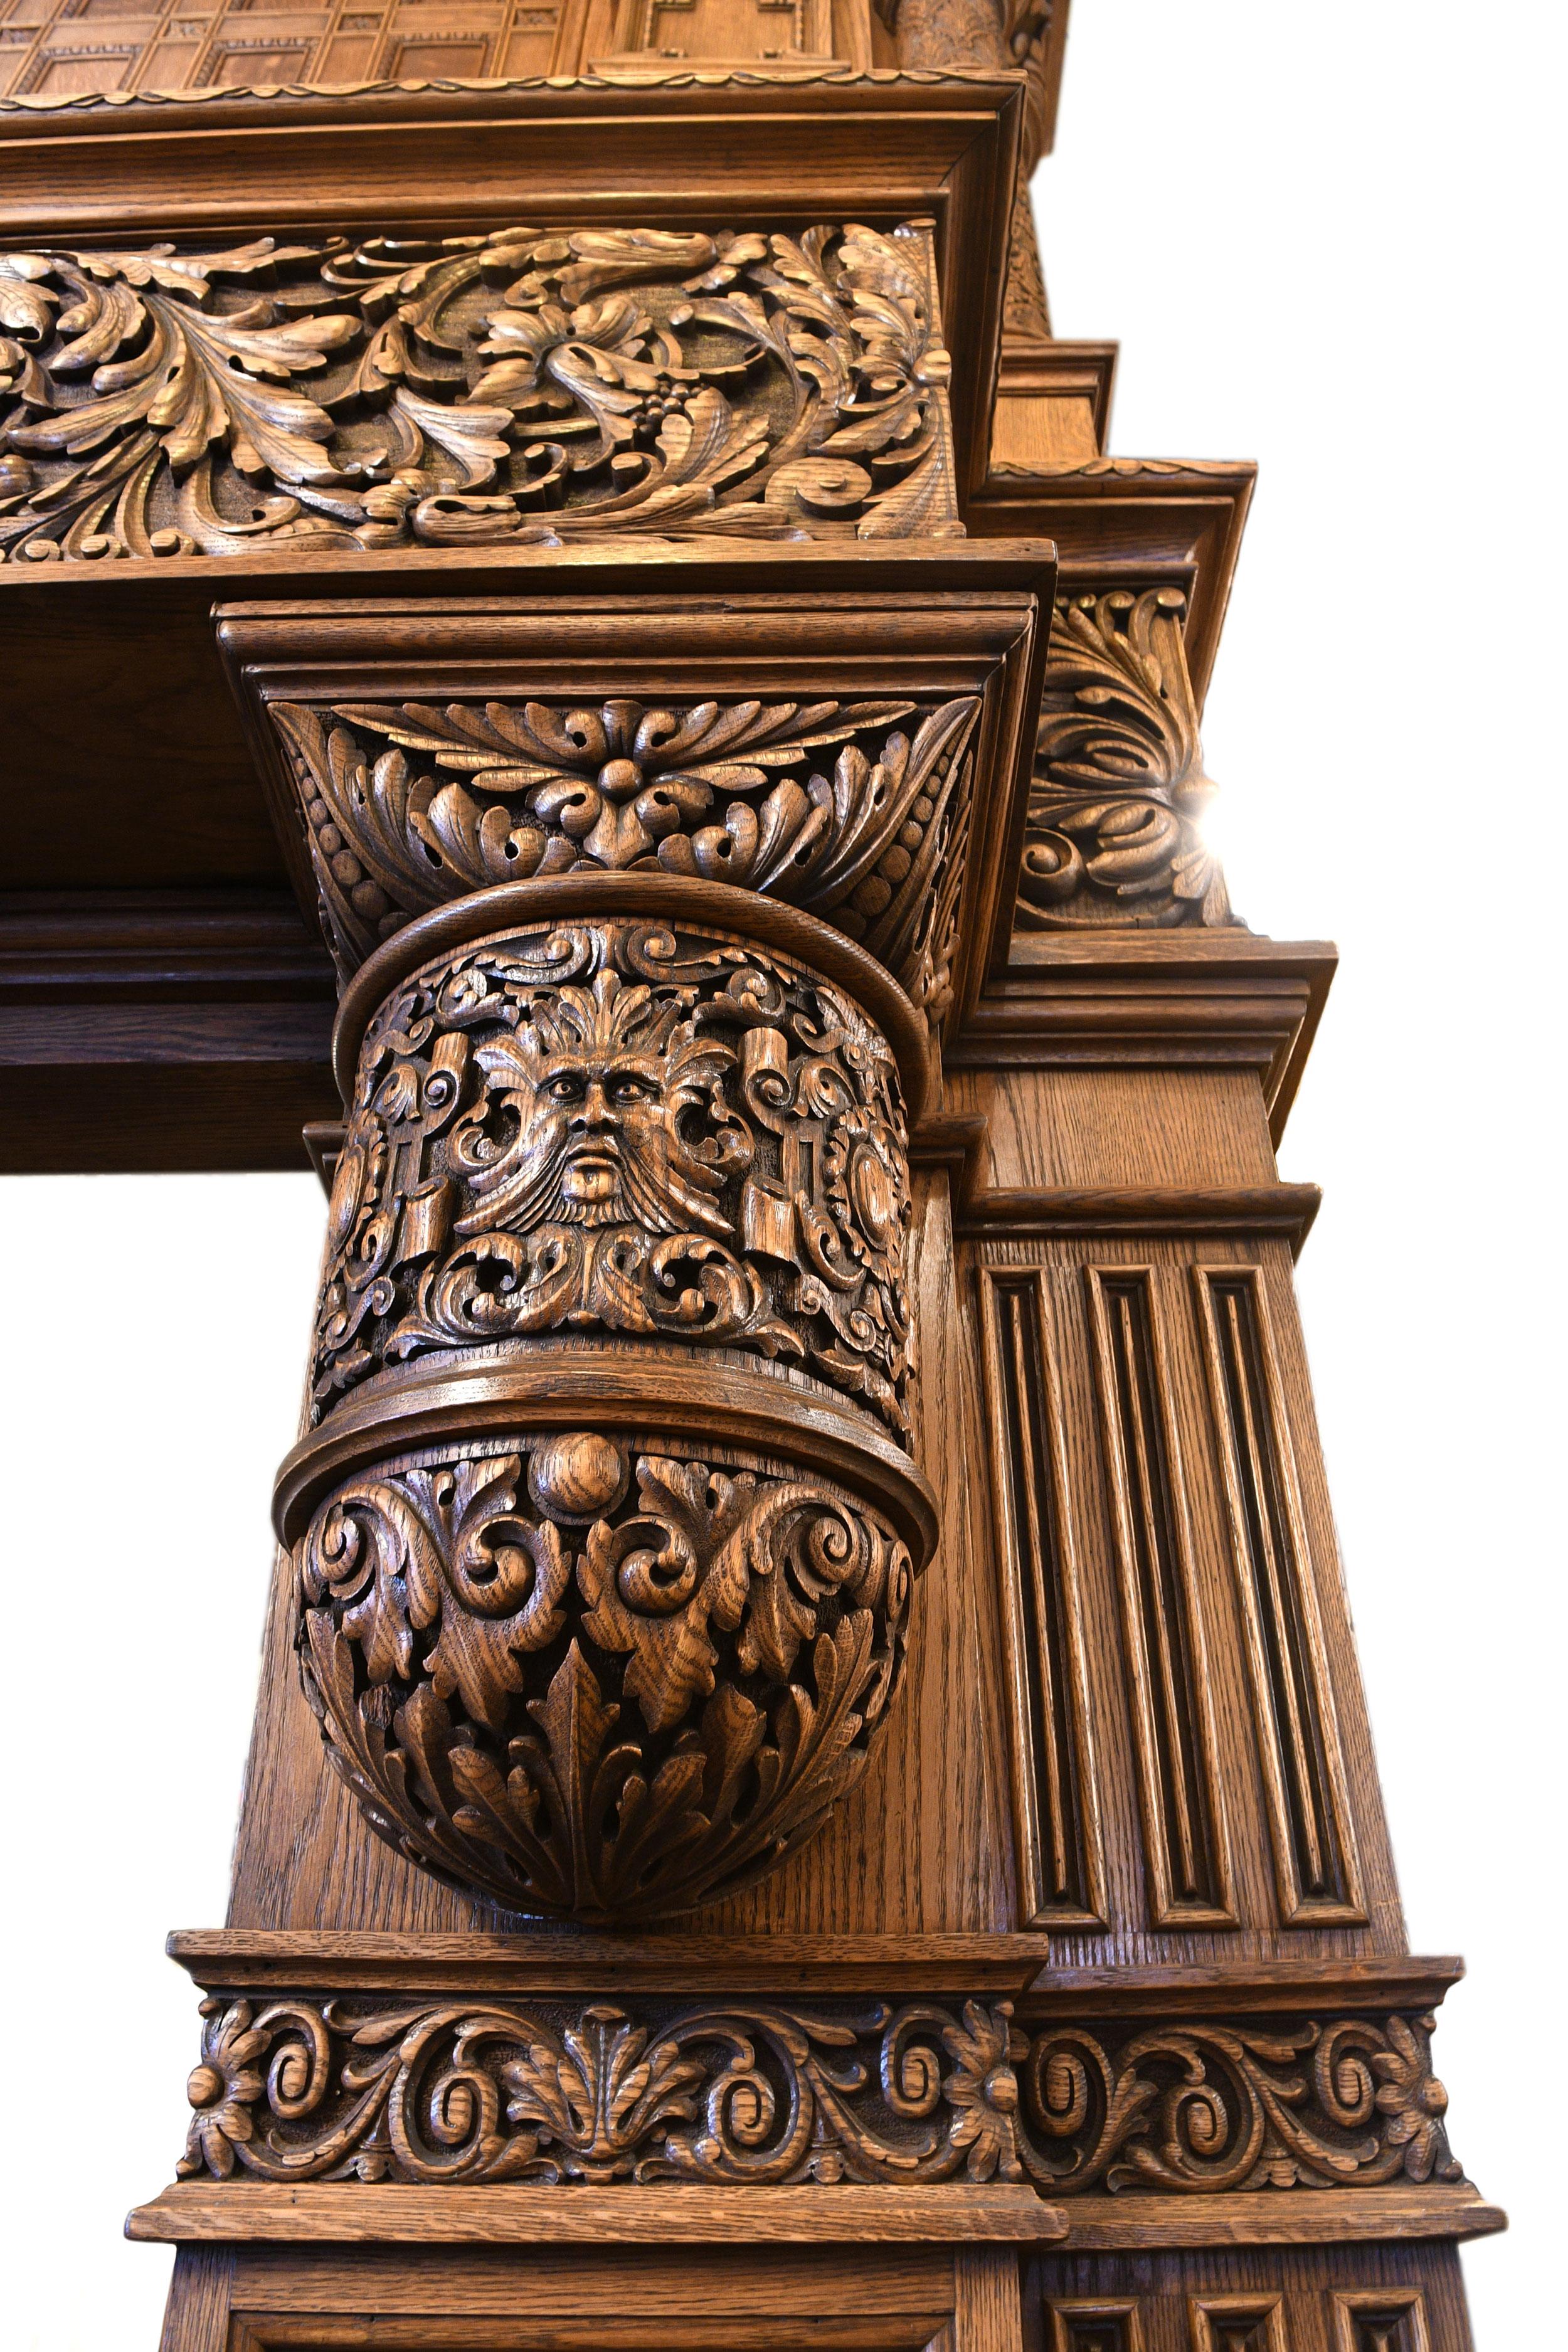 Hand-Carved Oversized Dragon Fireplace Mantel